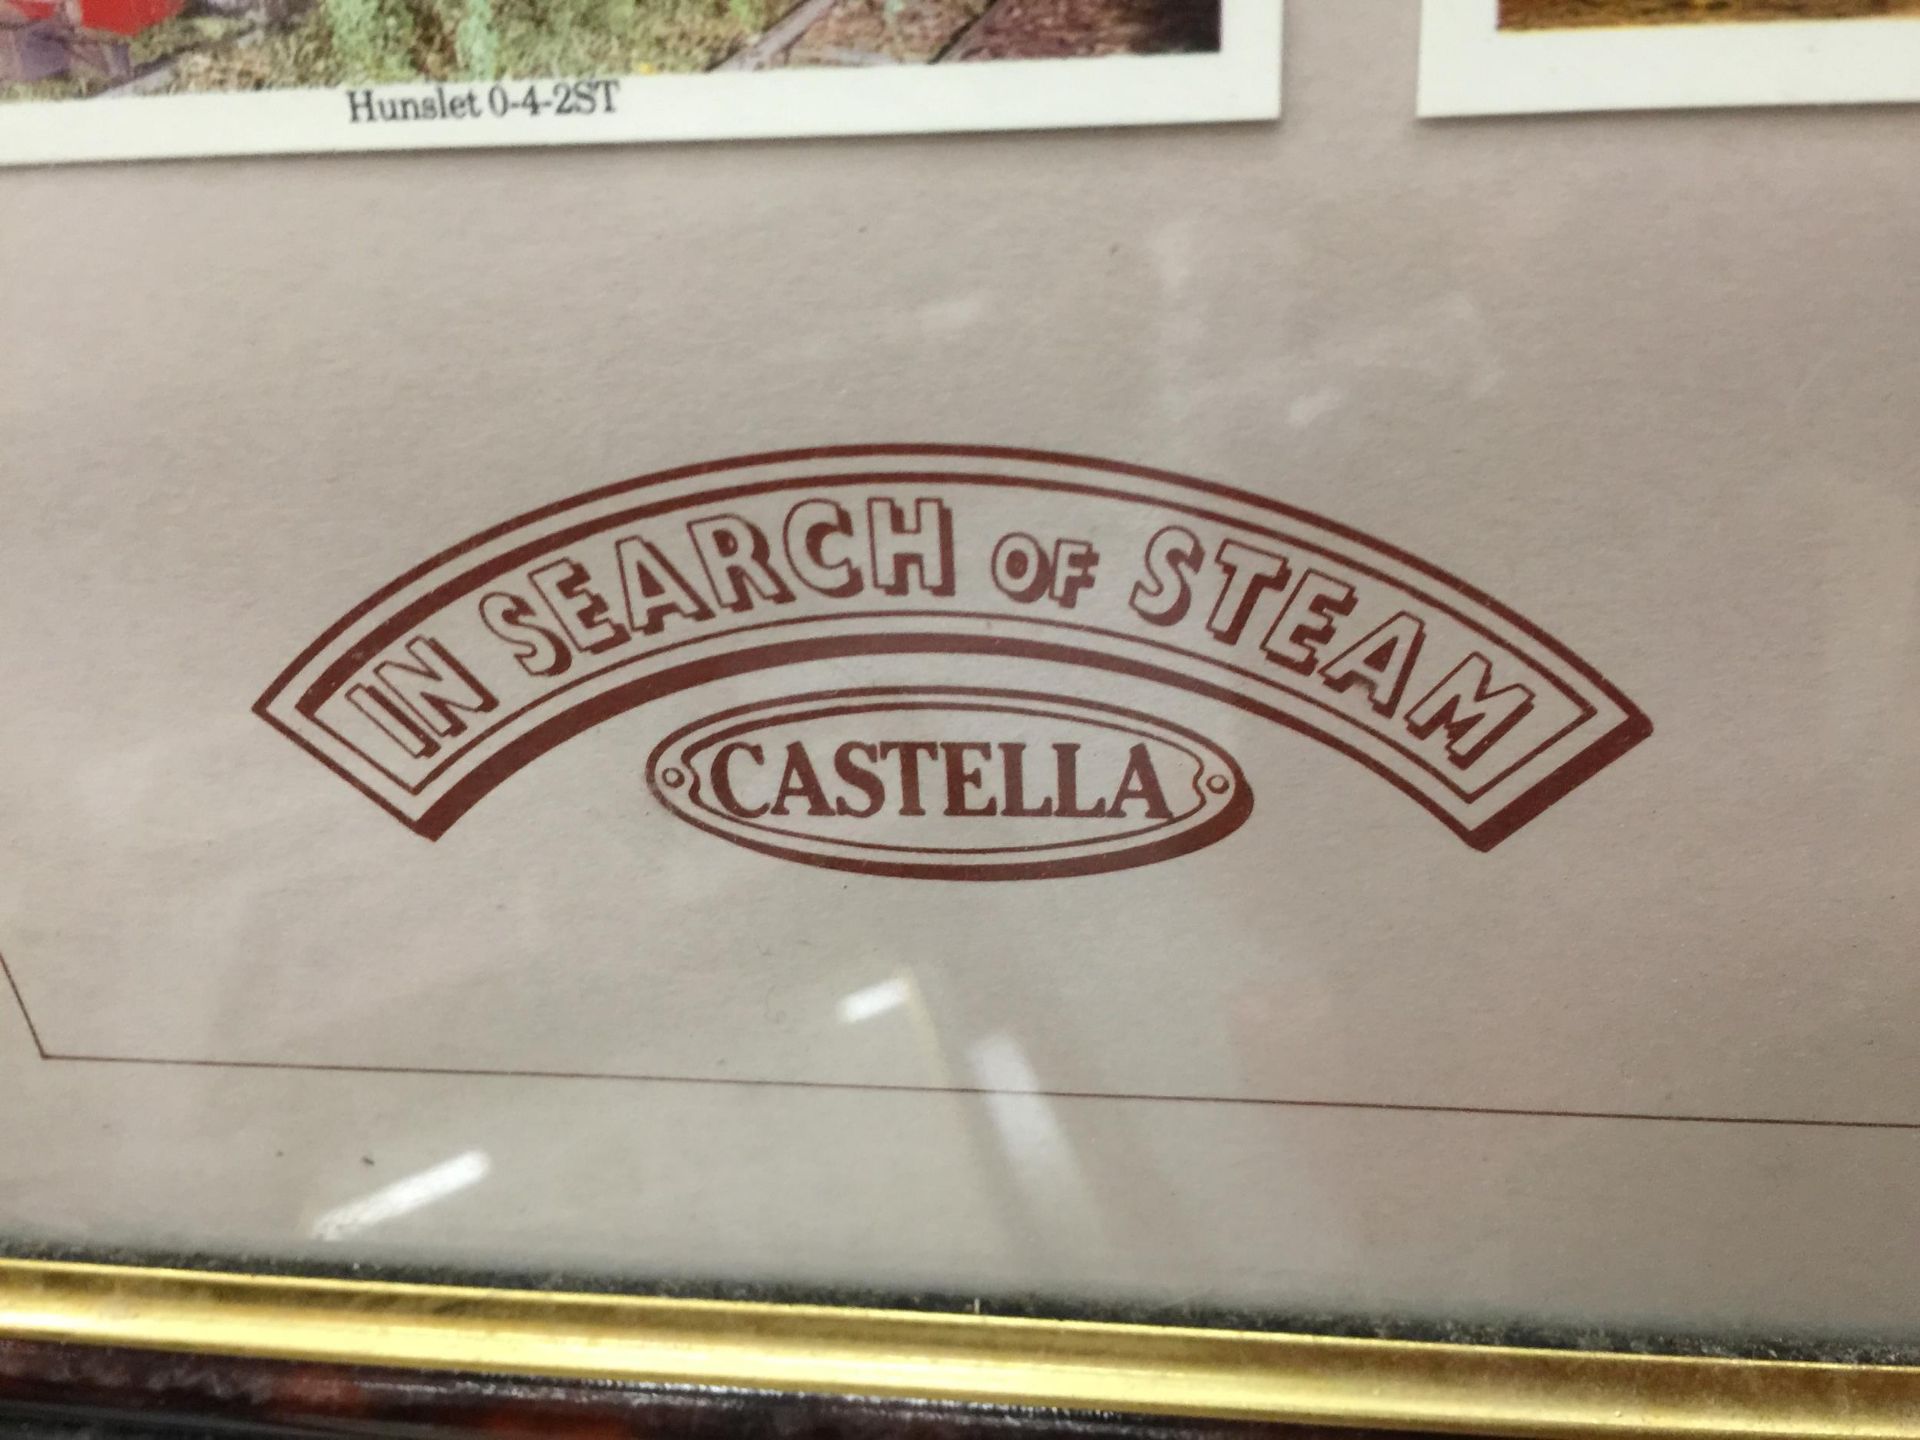 A FRAMED CASTELLA STEAM AGE CIGAR PICTURE CARDS - Image 3 of 3